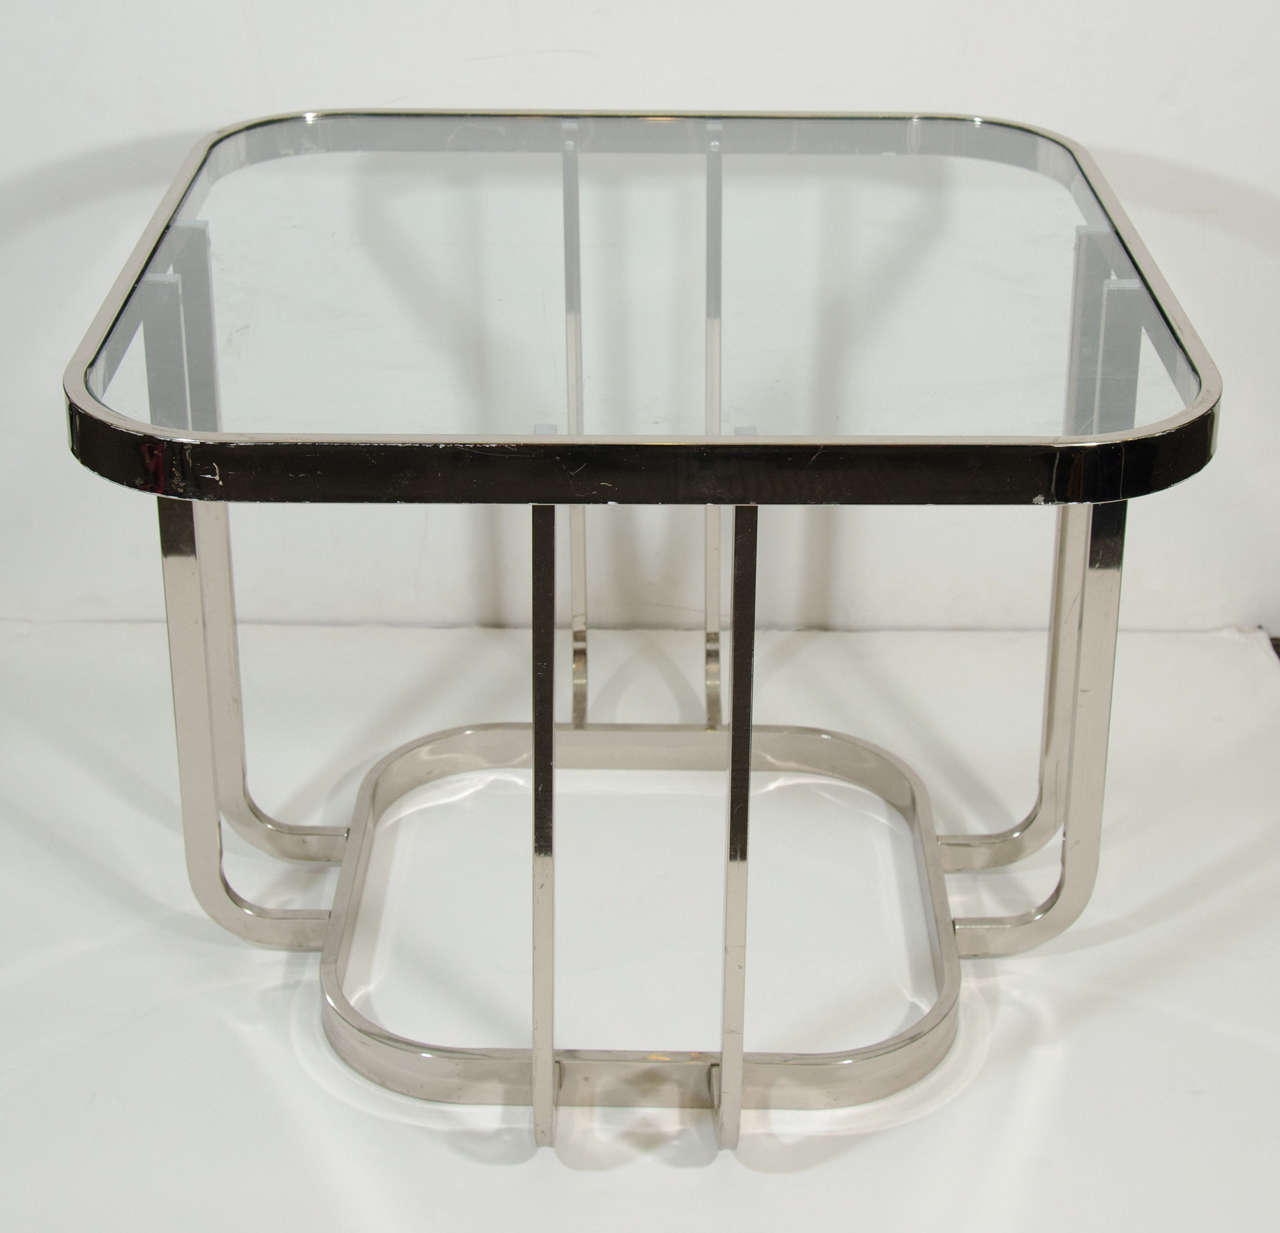 A mid century chrome pair of side or end tables with rounded corners and inset glass top.

Good vintage condition with minor scratches and loss to the chrome.

Reduced from: $1650